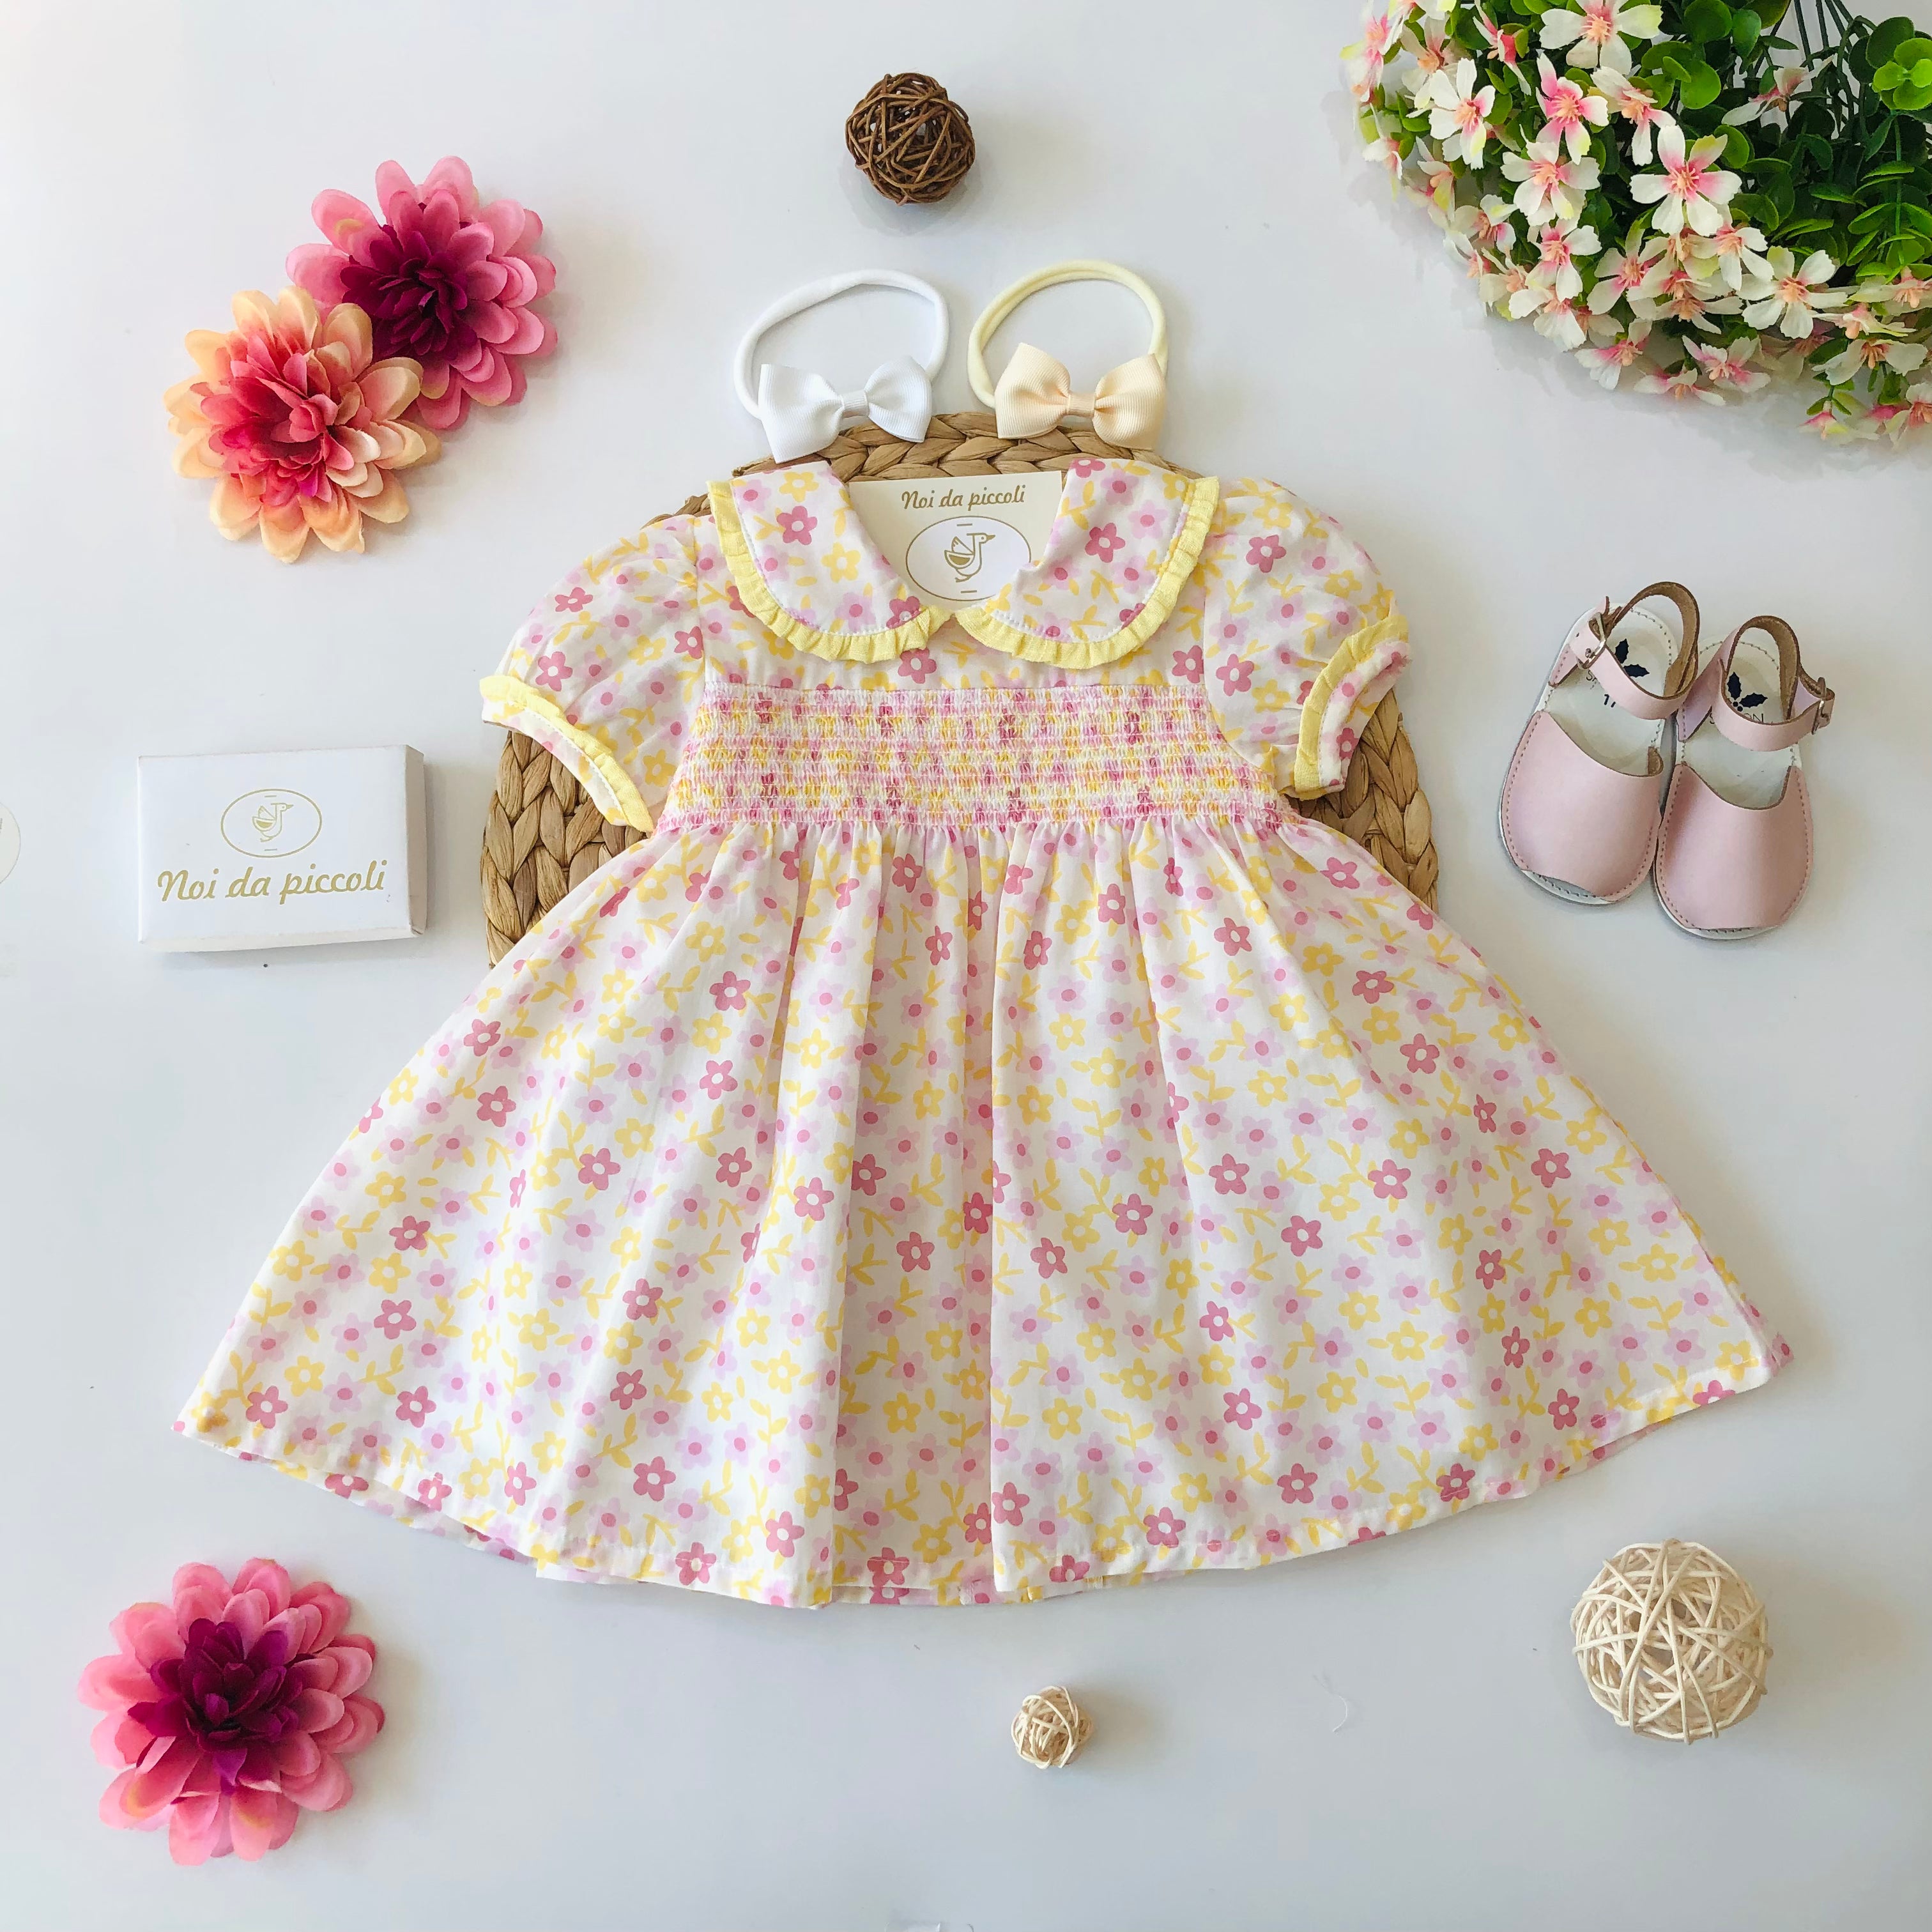 DRESS PINK AND YELLOW FLOWERS